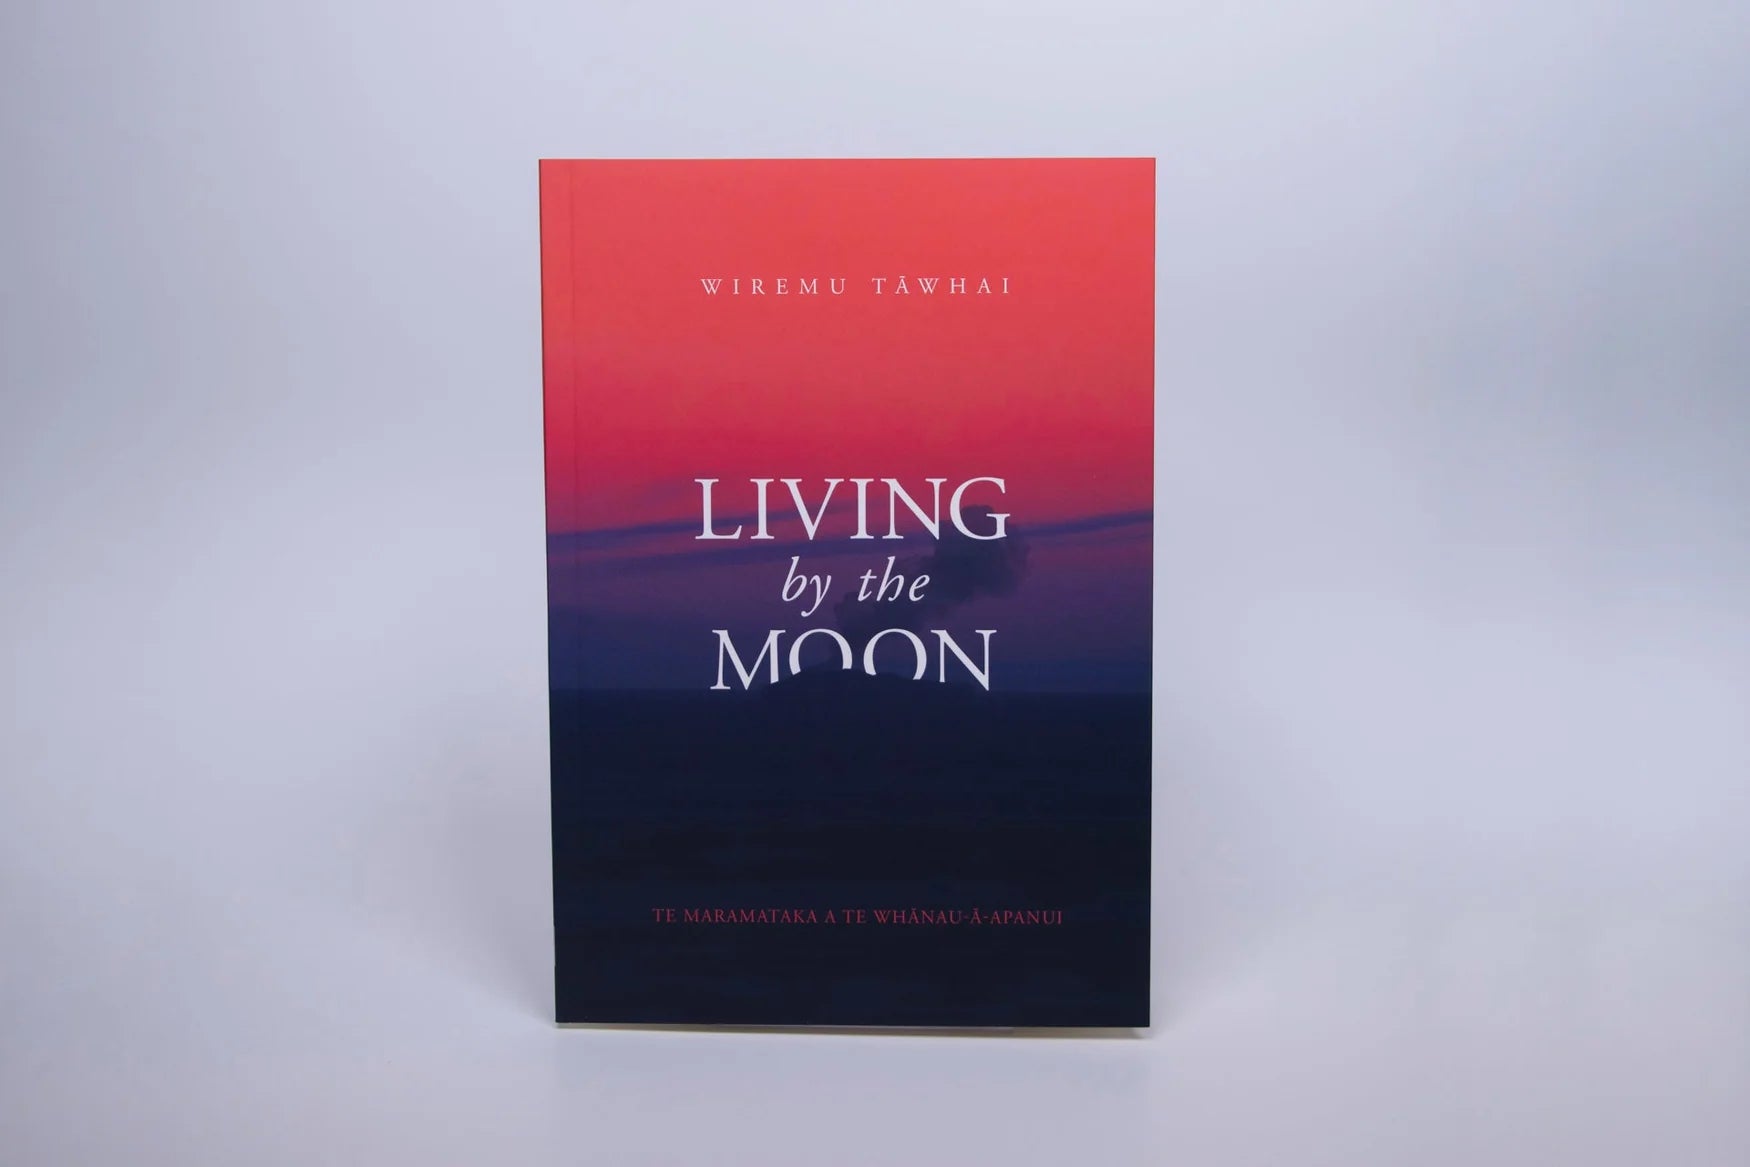 Living by the Moon by Wiremu Tawhai